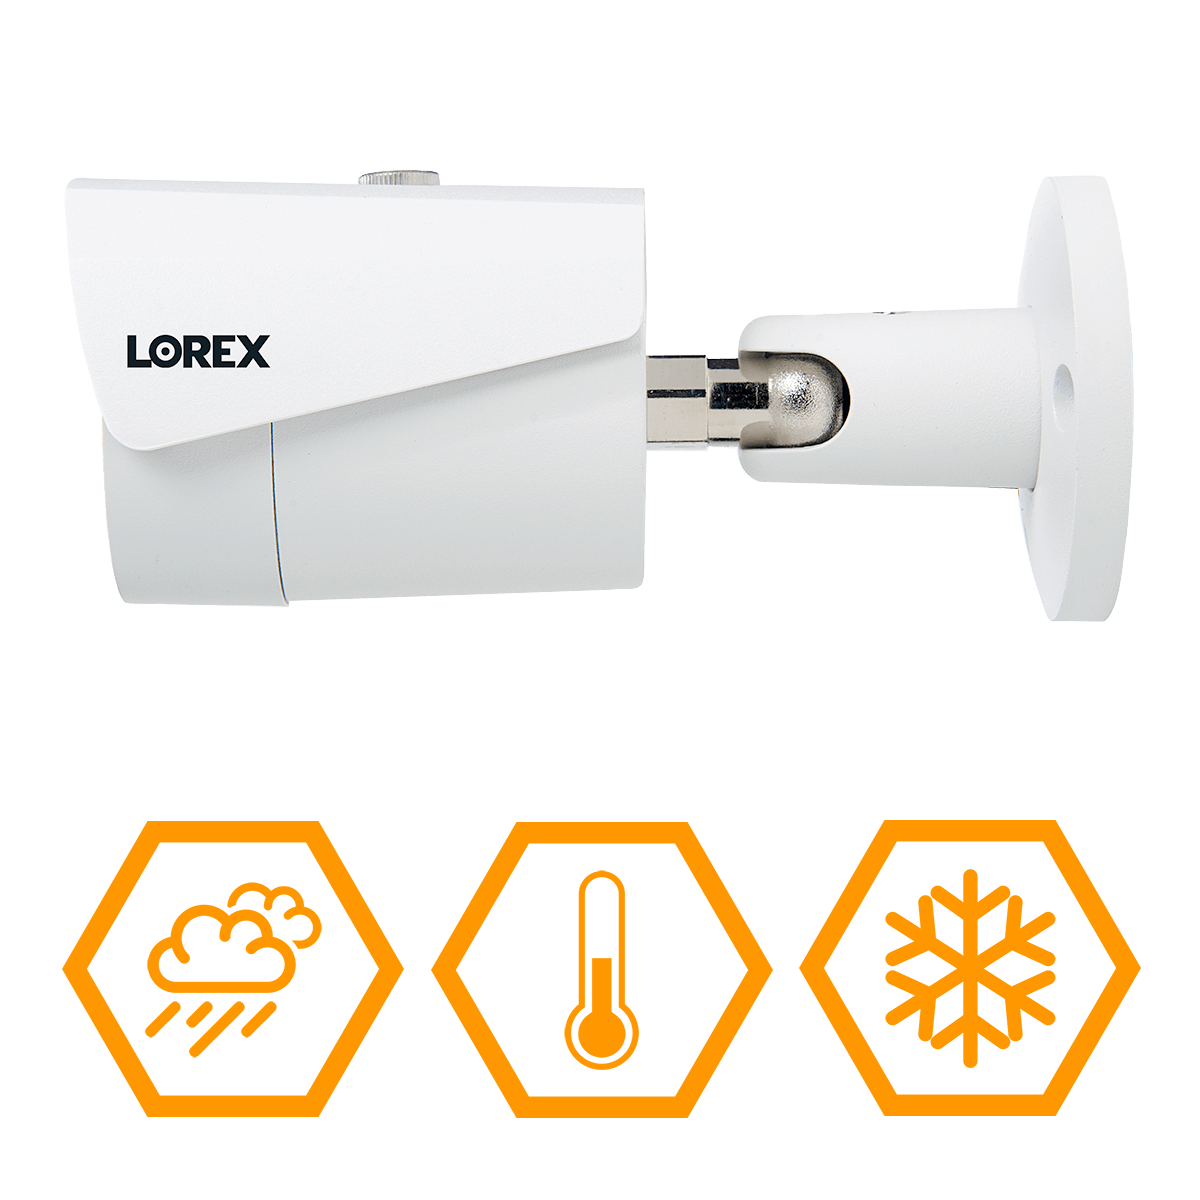 2K weatherproof security camera for year-round protection